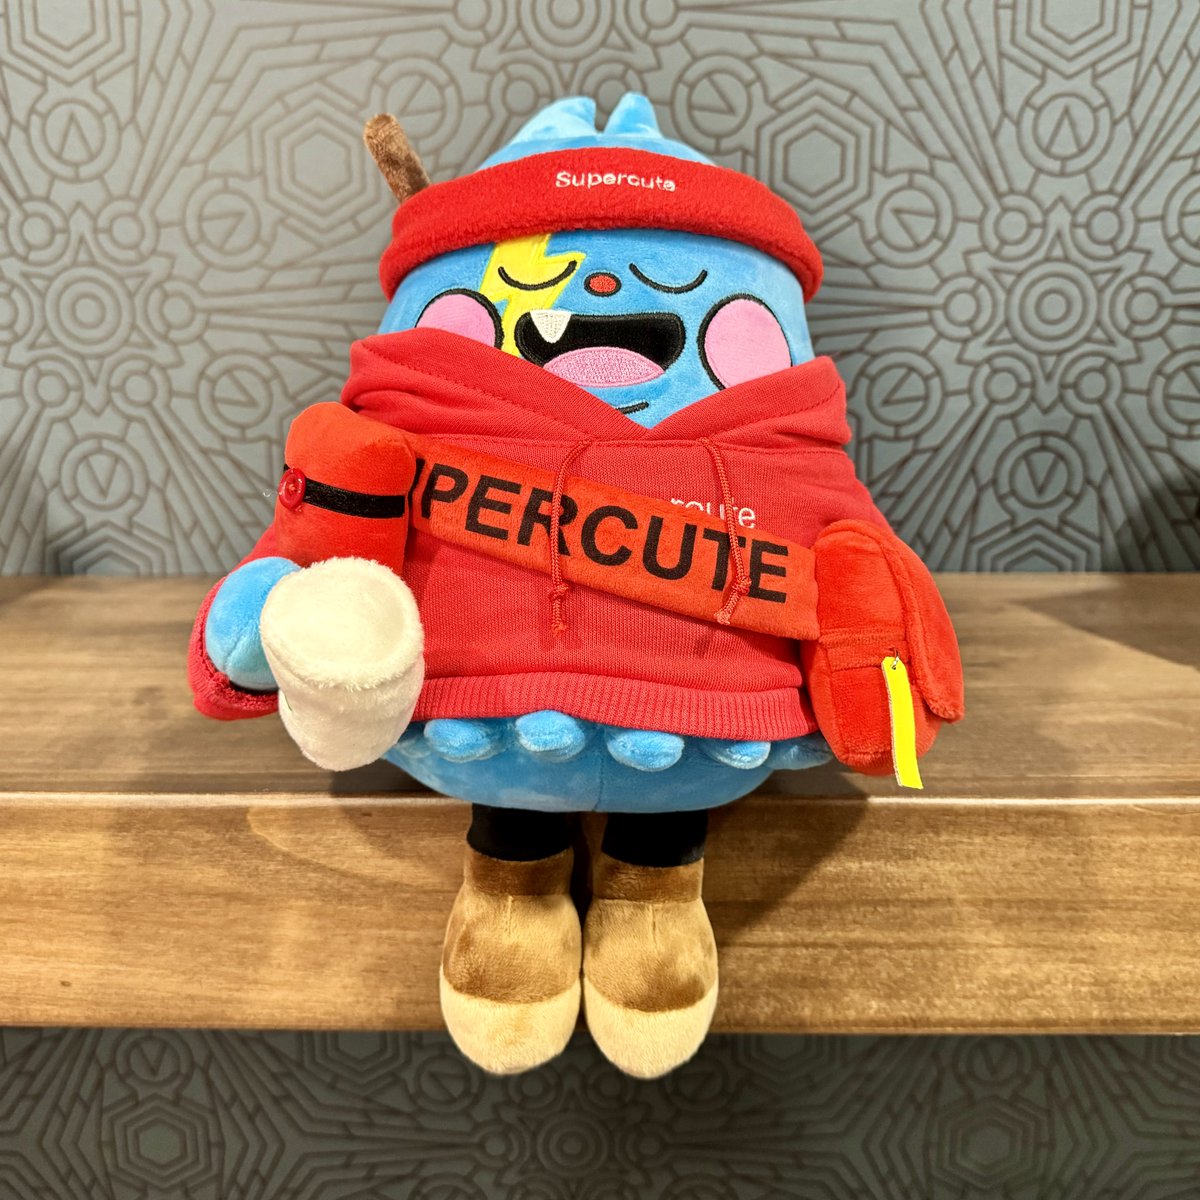 Let's kick off the week with an EPIC giveaway! This #Supercute plushie was found snooping around HQ and needs to be relocated to one of you. ☑️ Follow @SupercuteDC ☑️ Like & Repost ☑️ Tag a friend who would love this plushie! Winner will be announced on Friday! 💖